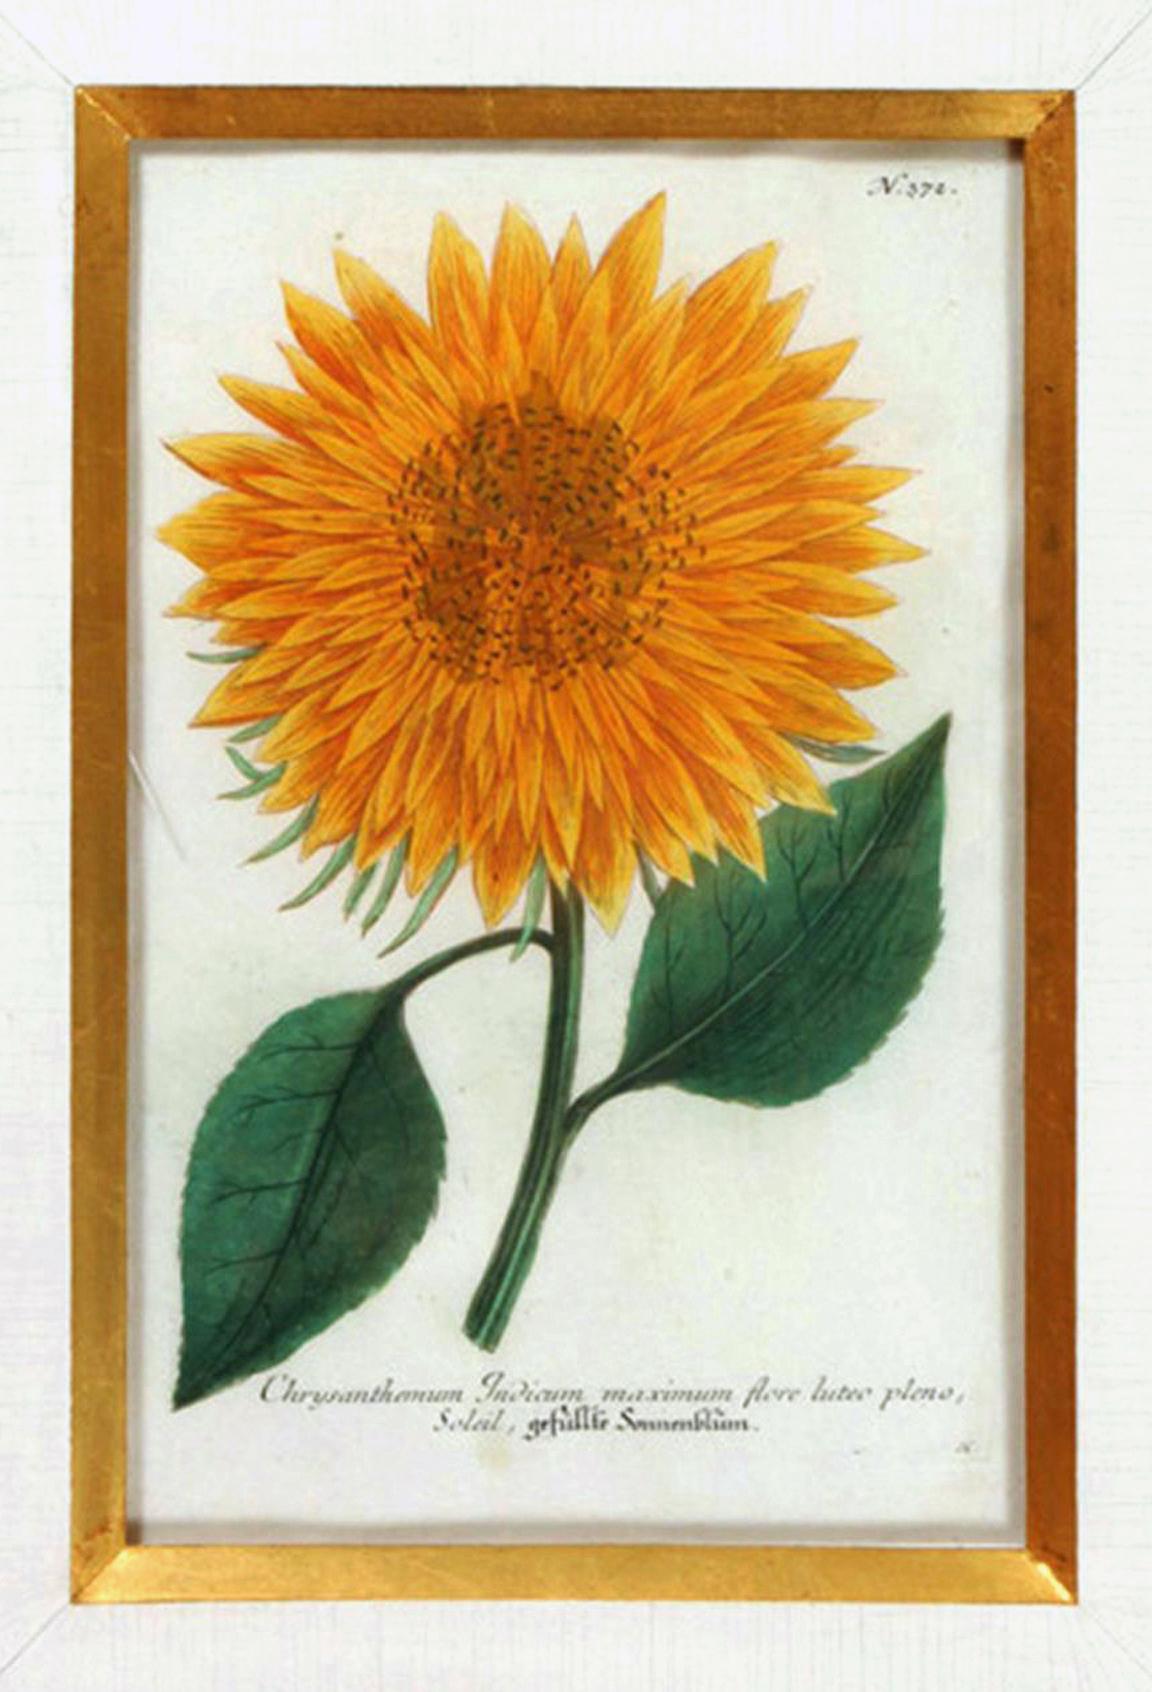 Johann Weinmann Engravings of Sunflowers, 
circa 1737-1745.

The Weinmann sunflower engravings are numbers 372 & 374 and are both signed by Haid. The engravings within a gold and green faux green leather frame.

Dimensions: 21 3/4 inches x16